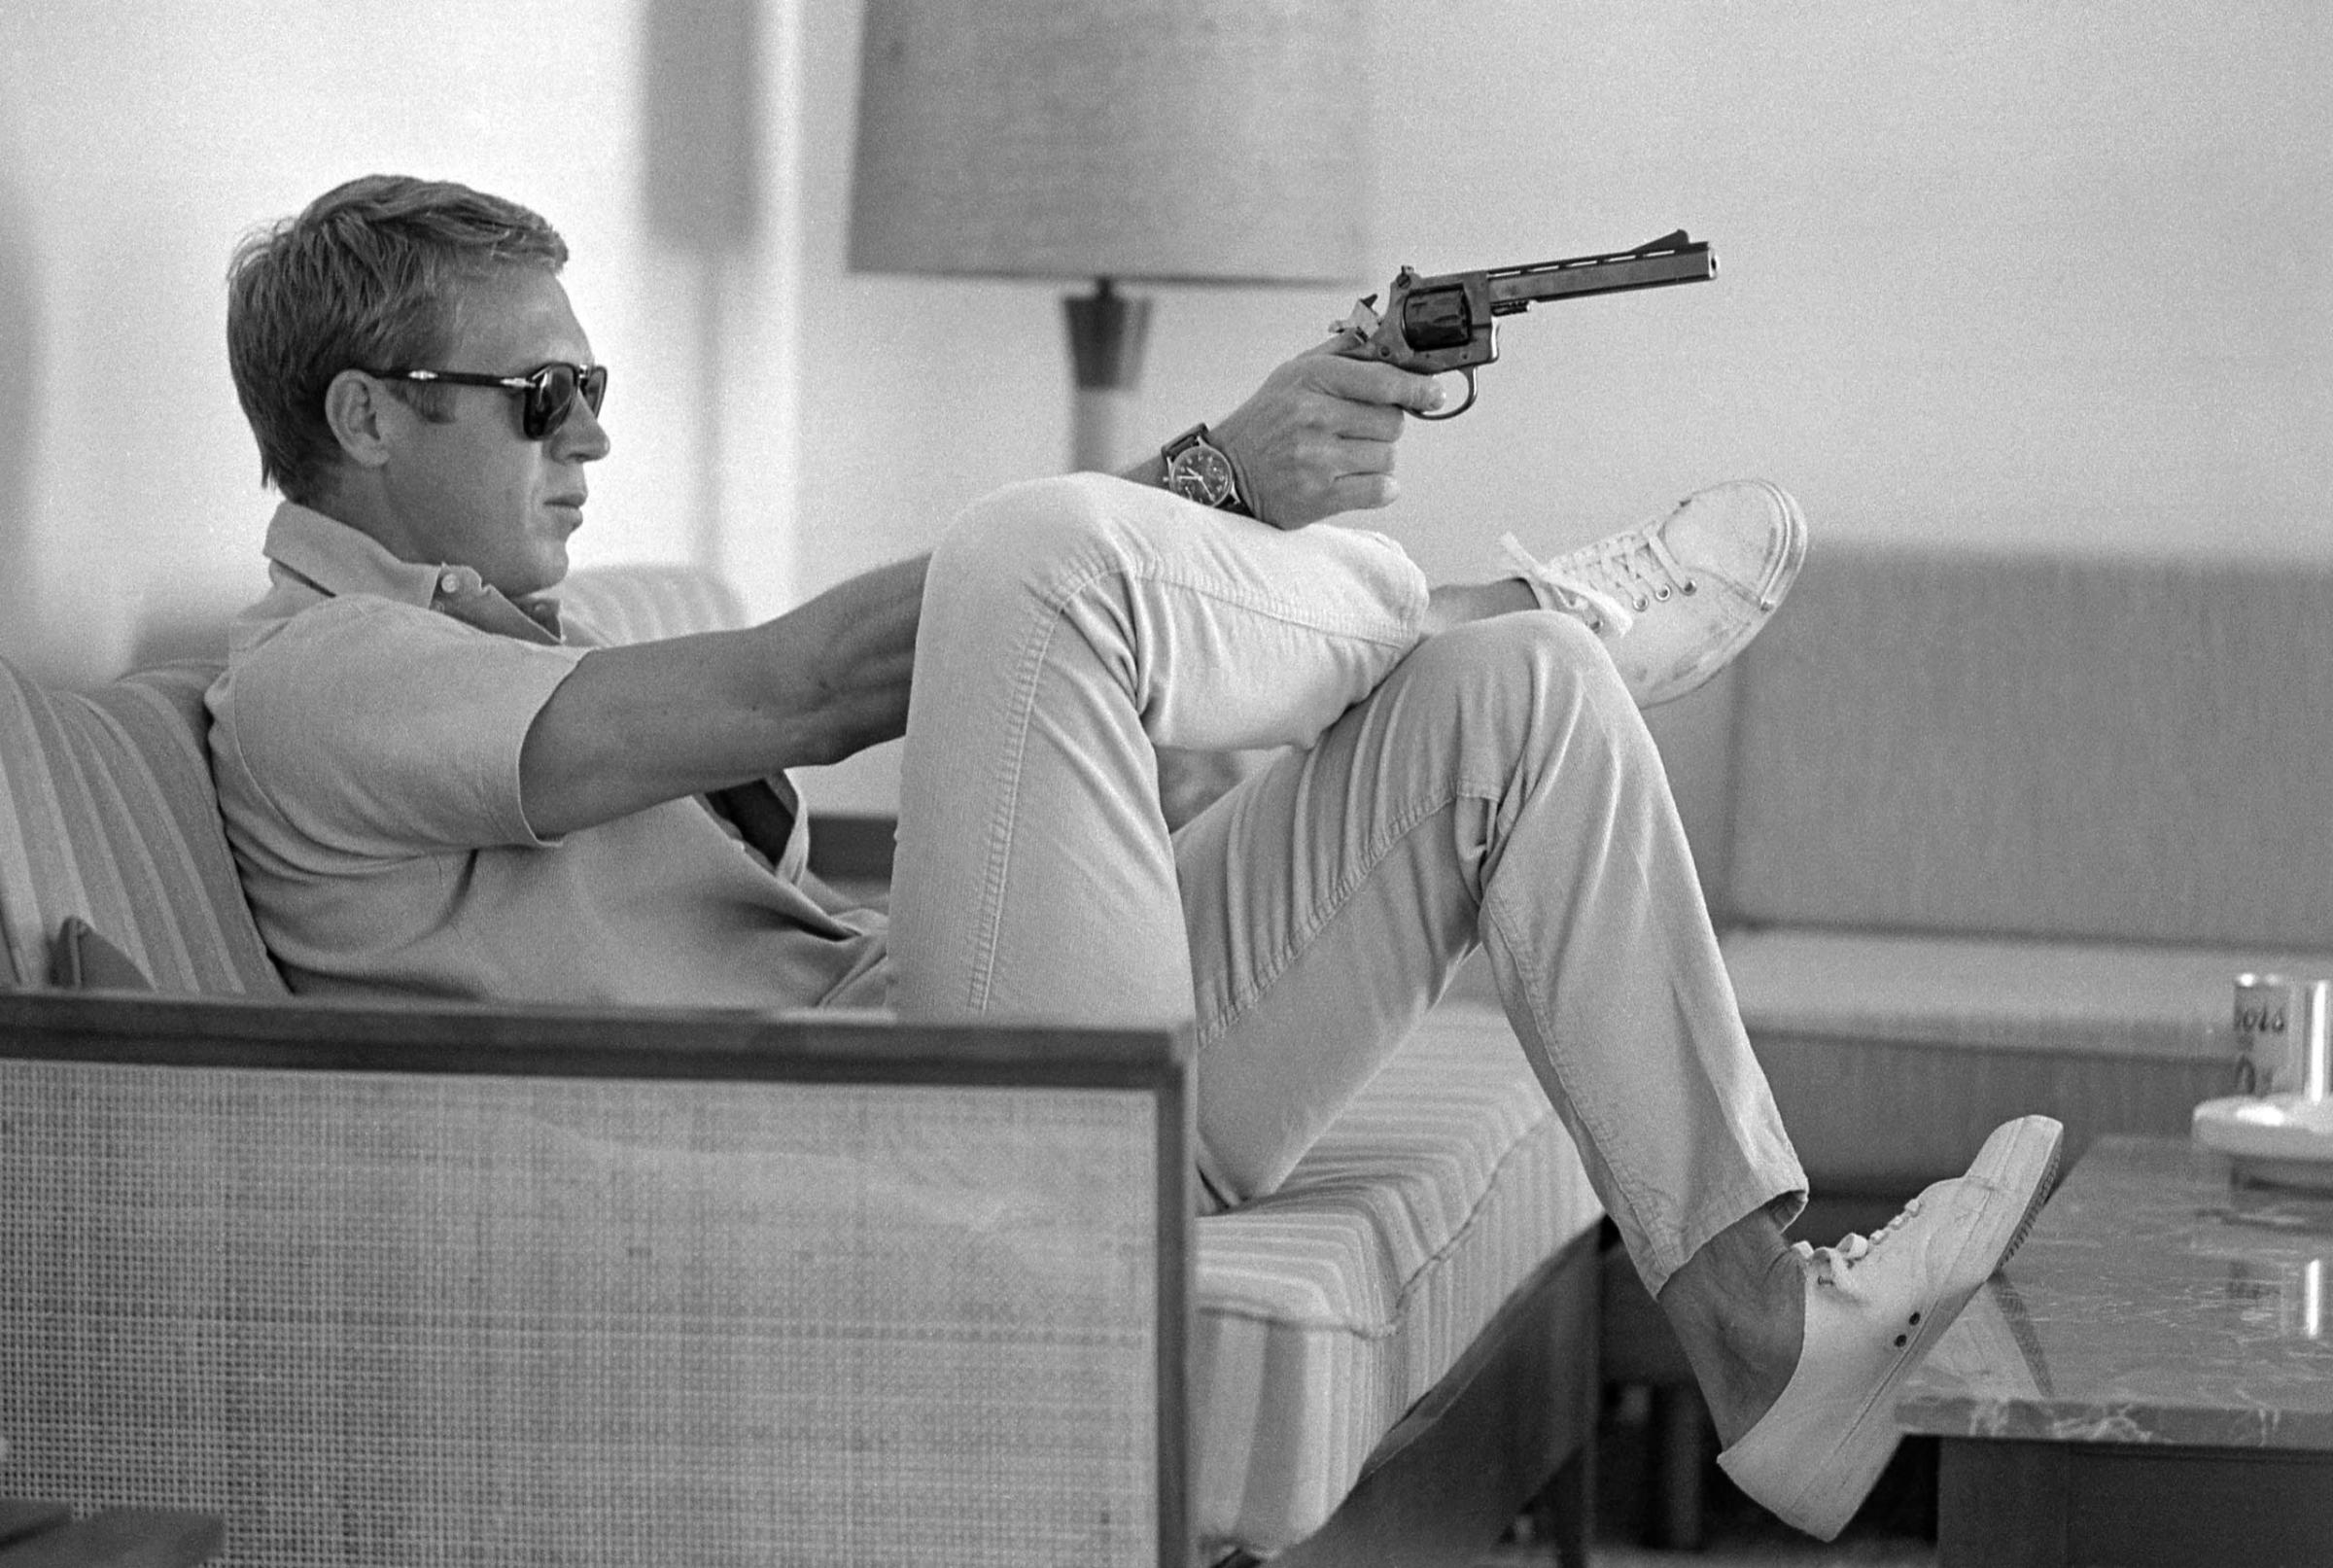 At his bungalow in Palm Springs, Steve McQueen practices his aim before heading out for a shooting session in the desert, 1963.